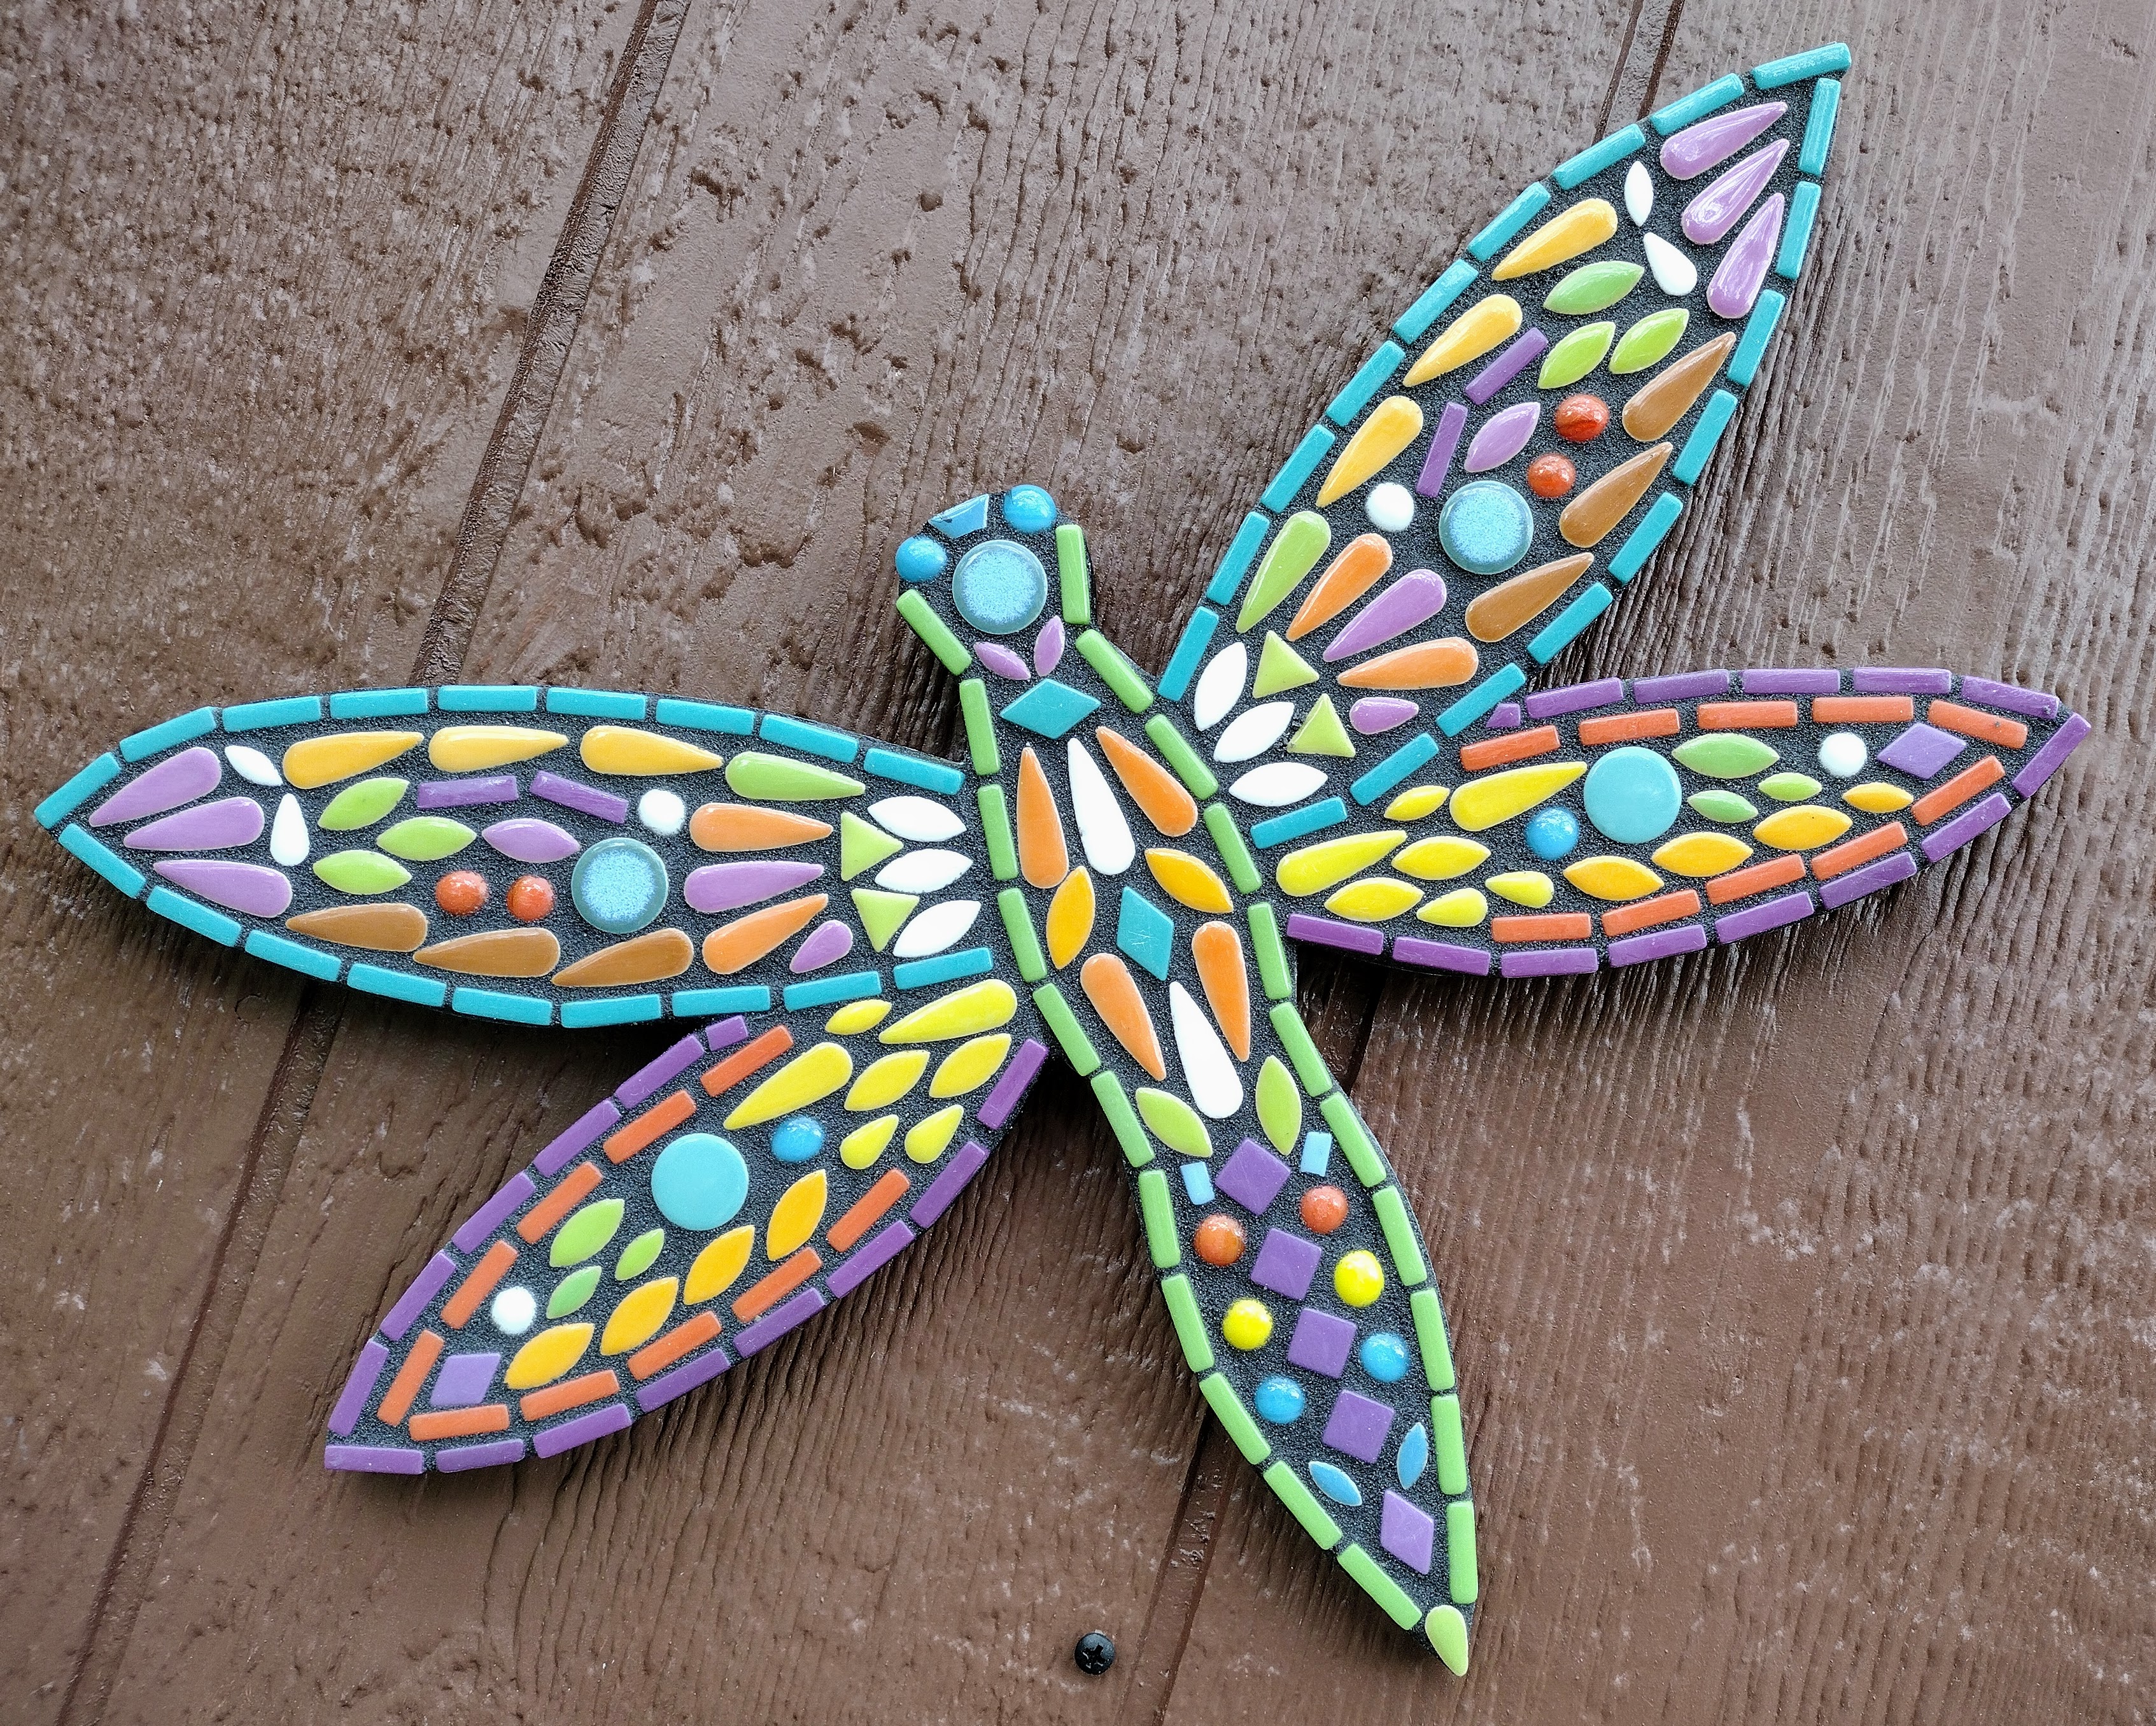 Fun & Games :: Kits :: Arts & Crafts Fun :: Waterproof mosaic substrate,  DIY Dragonfly mosaic substrate, Create your own mosaic Dragonfly on this  indoor, outdoor backer for mosaic artwork.